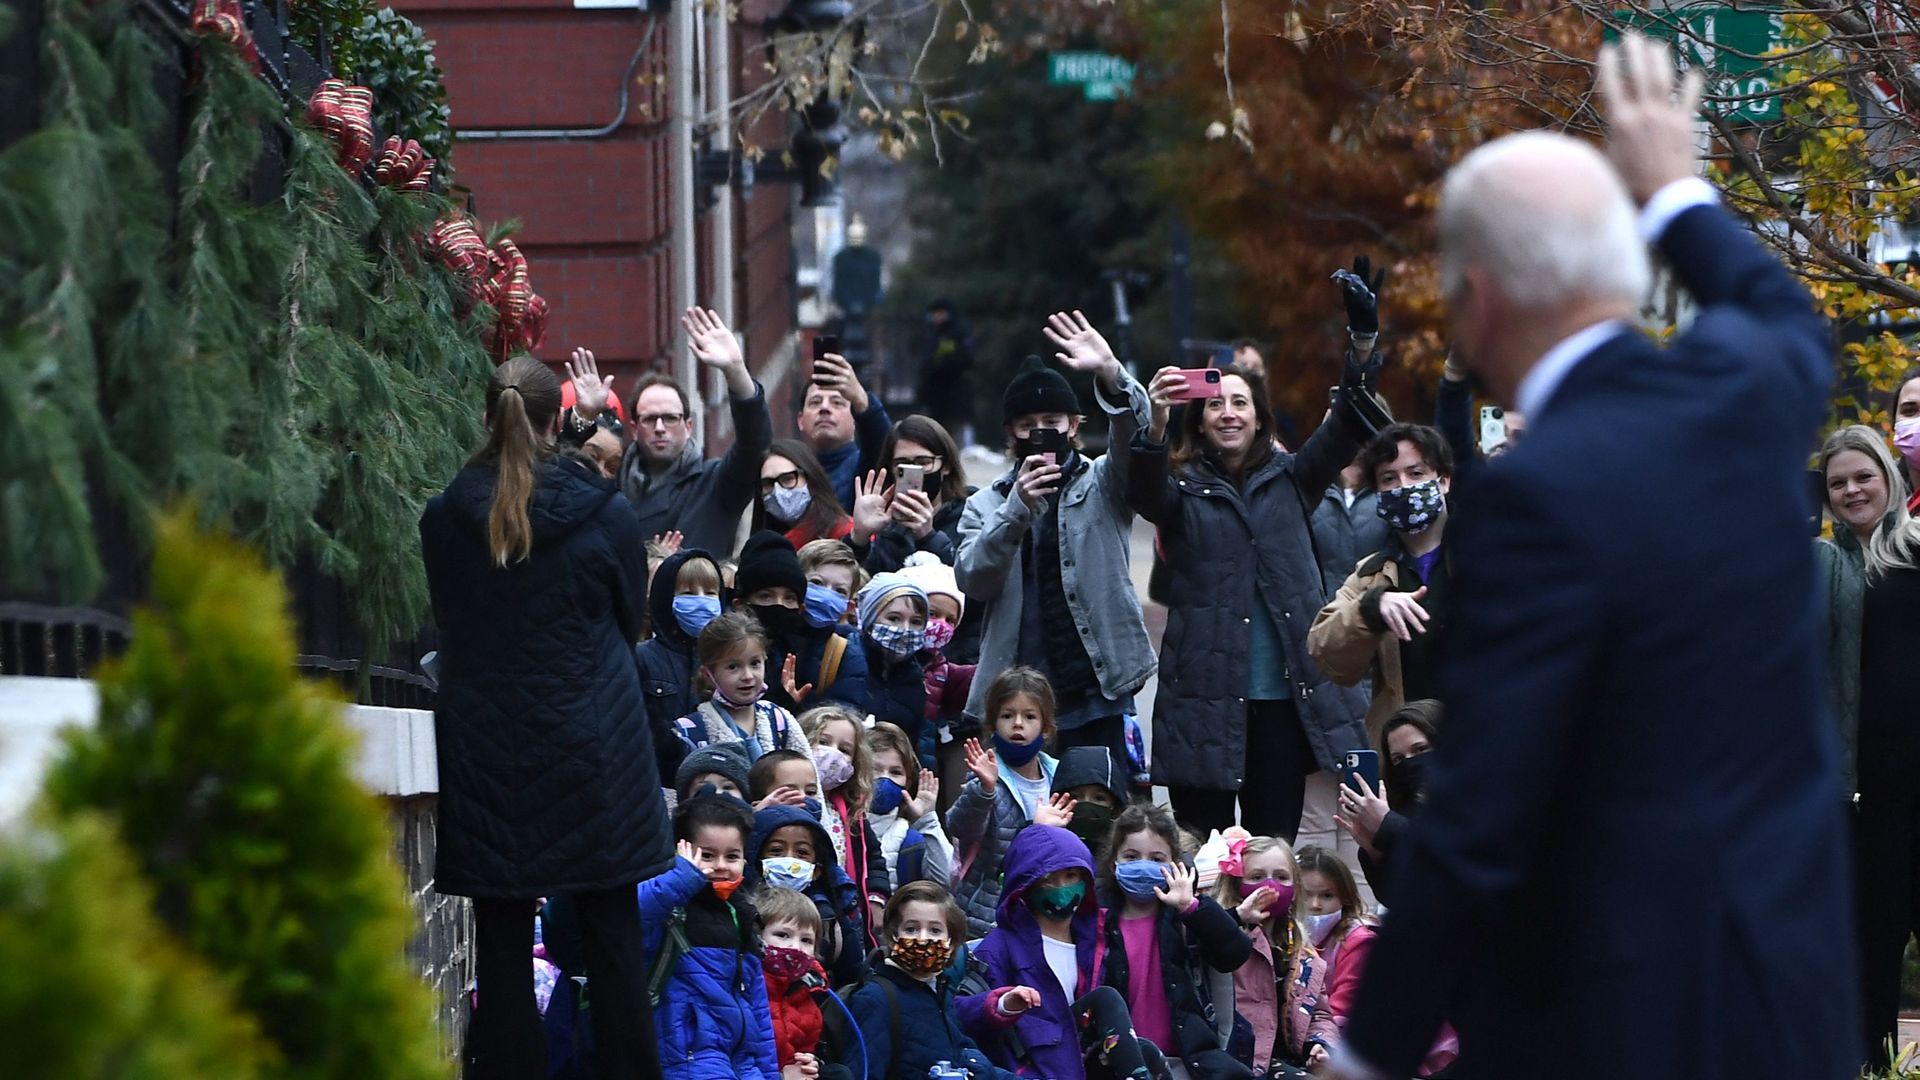 President Biden is seen waving to a group of children and their caretakers as he arrives at a Washington church.